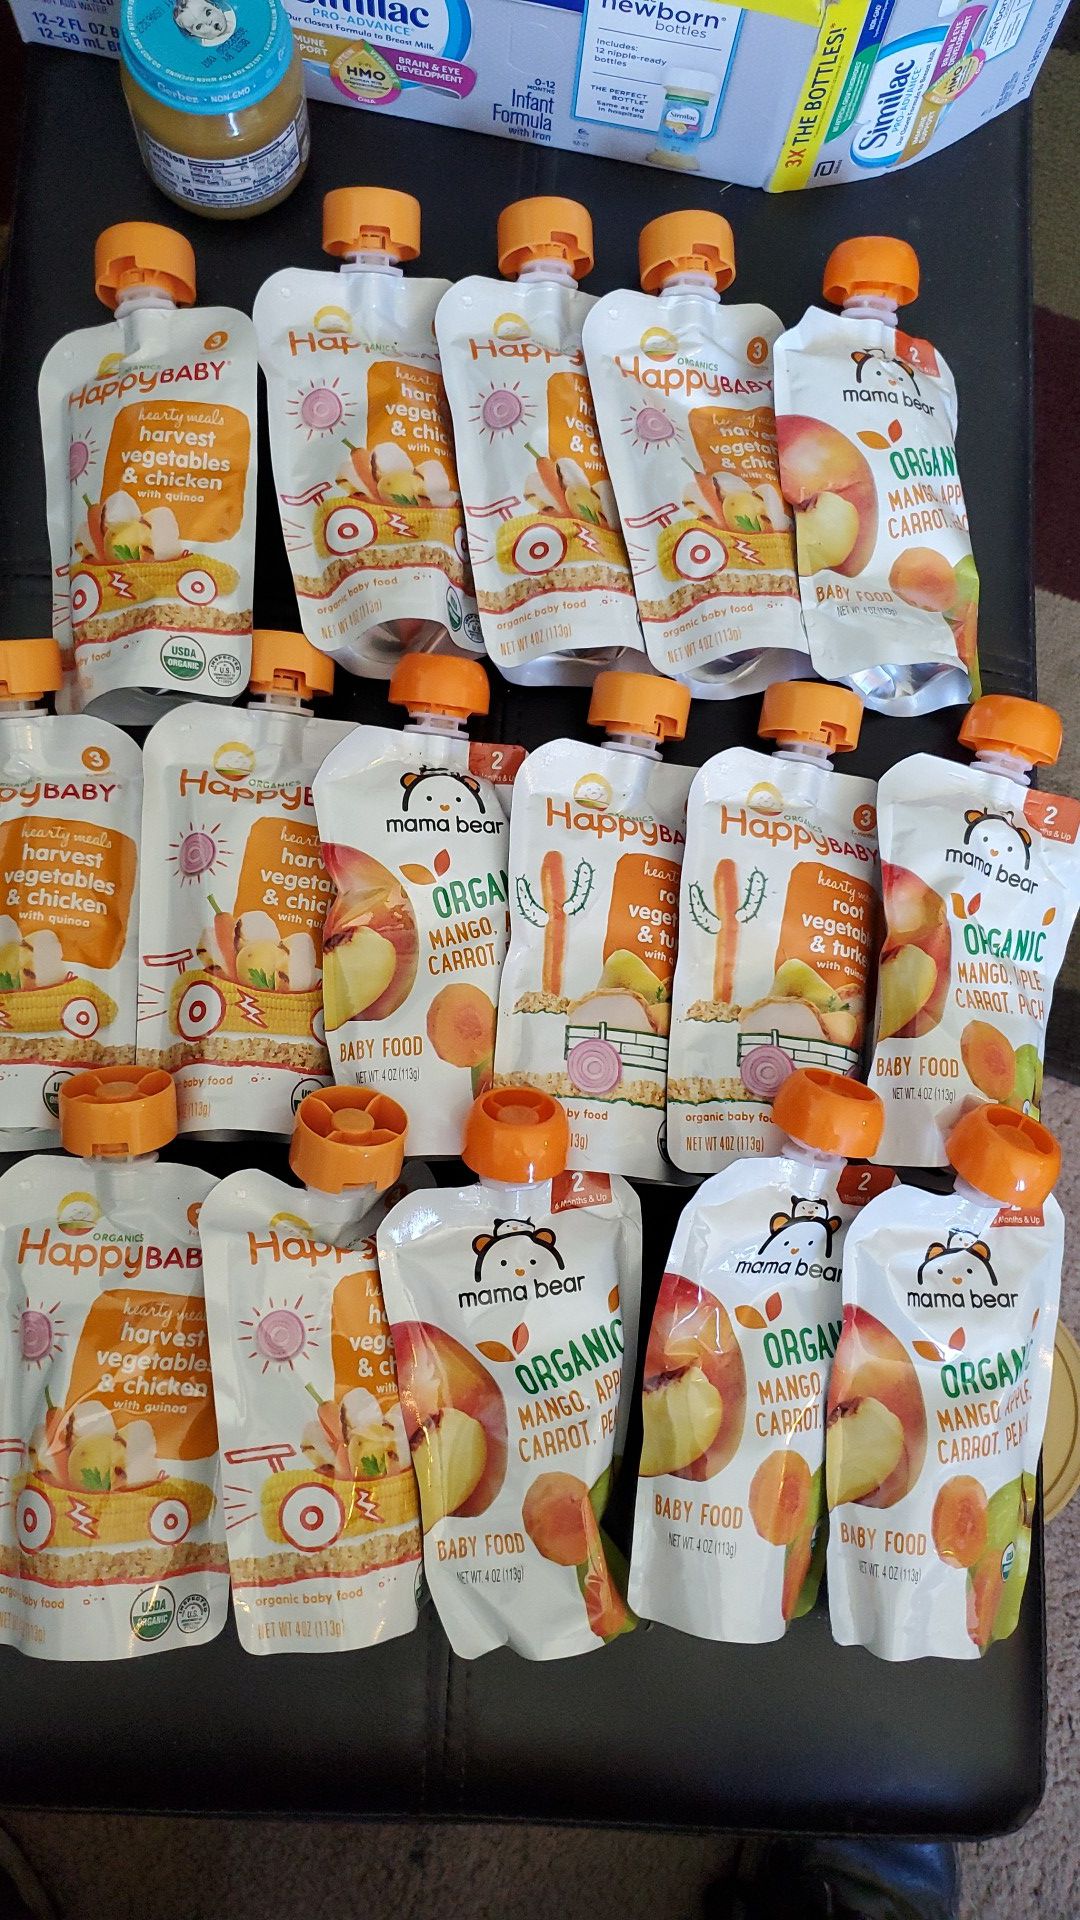 Baby food pouches 16 / 4 oz expiration from January 2021 through August 2021 all for $5